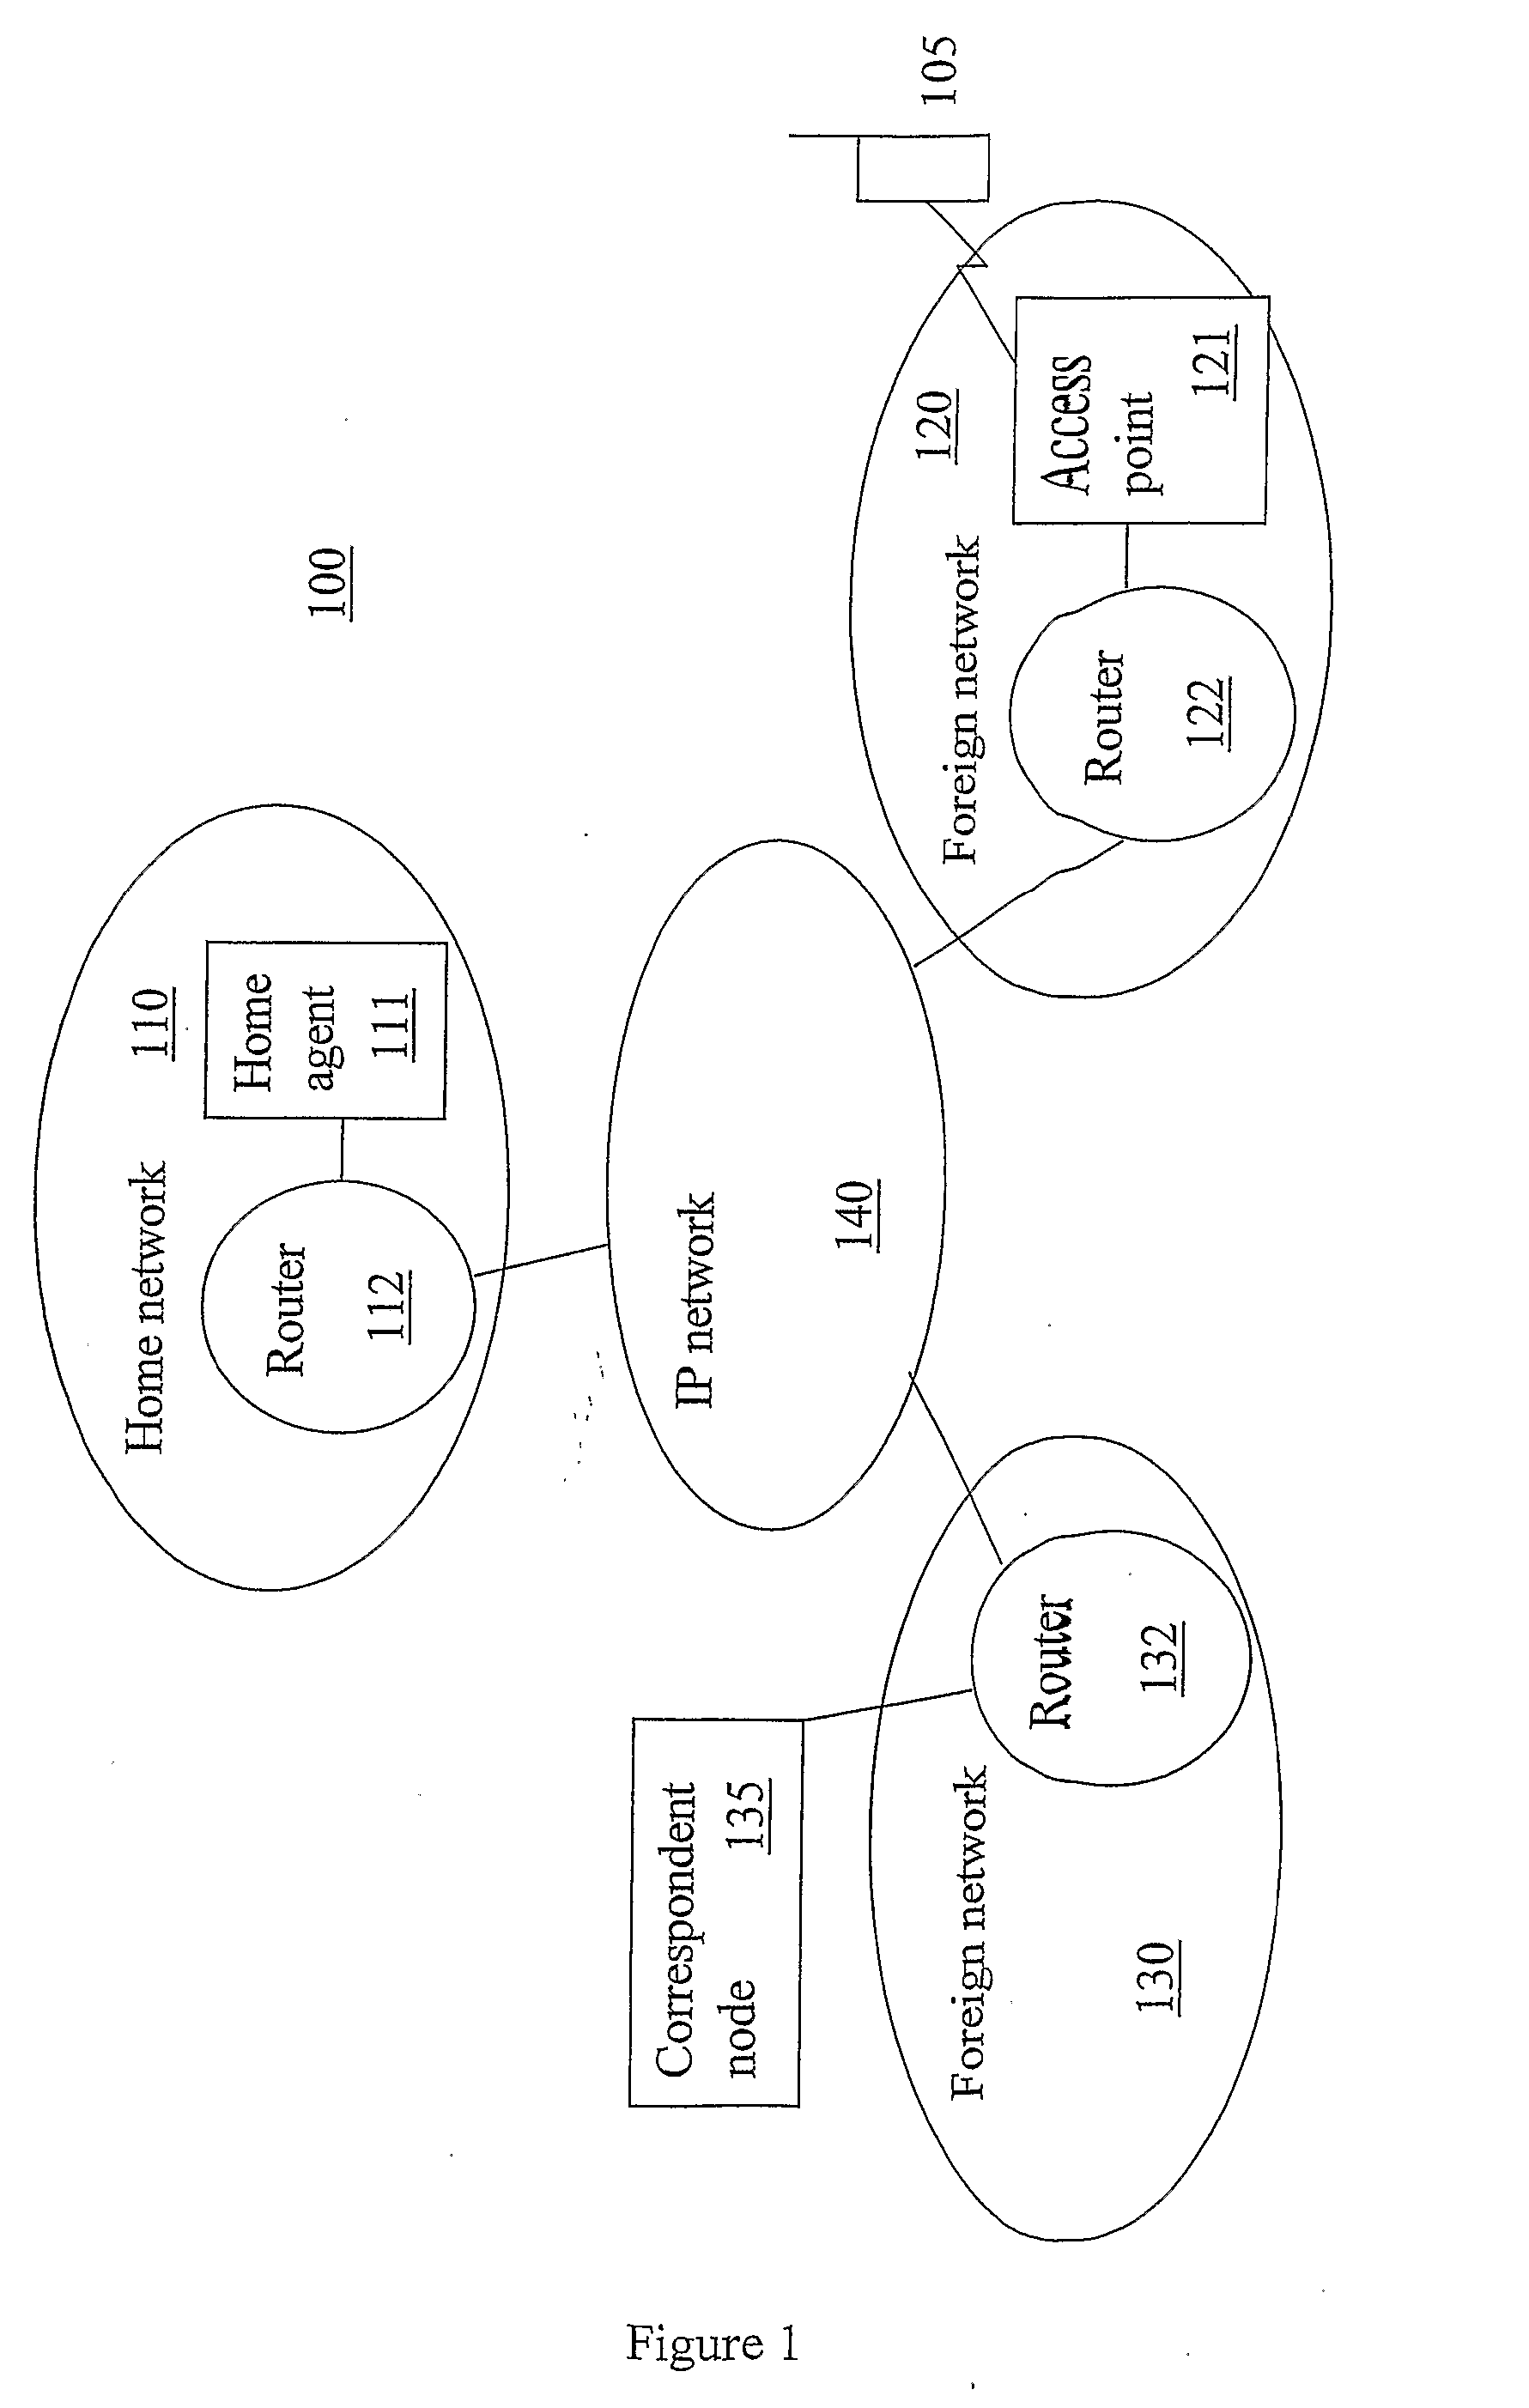 Methods and Nodes in a Communication System for Controlling the Use of Access Resources